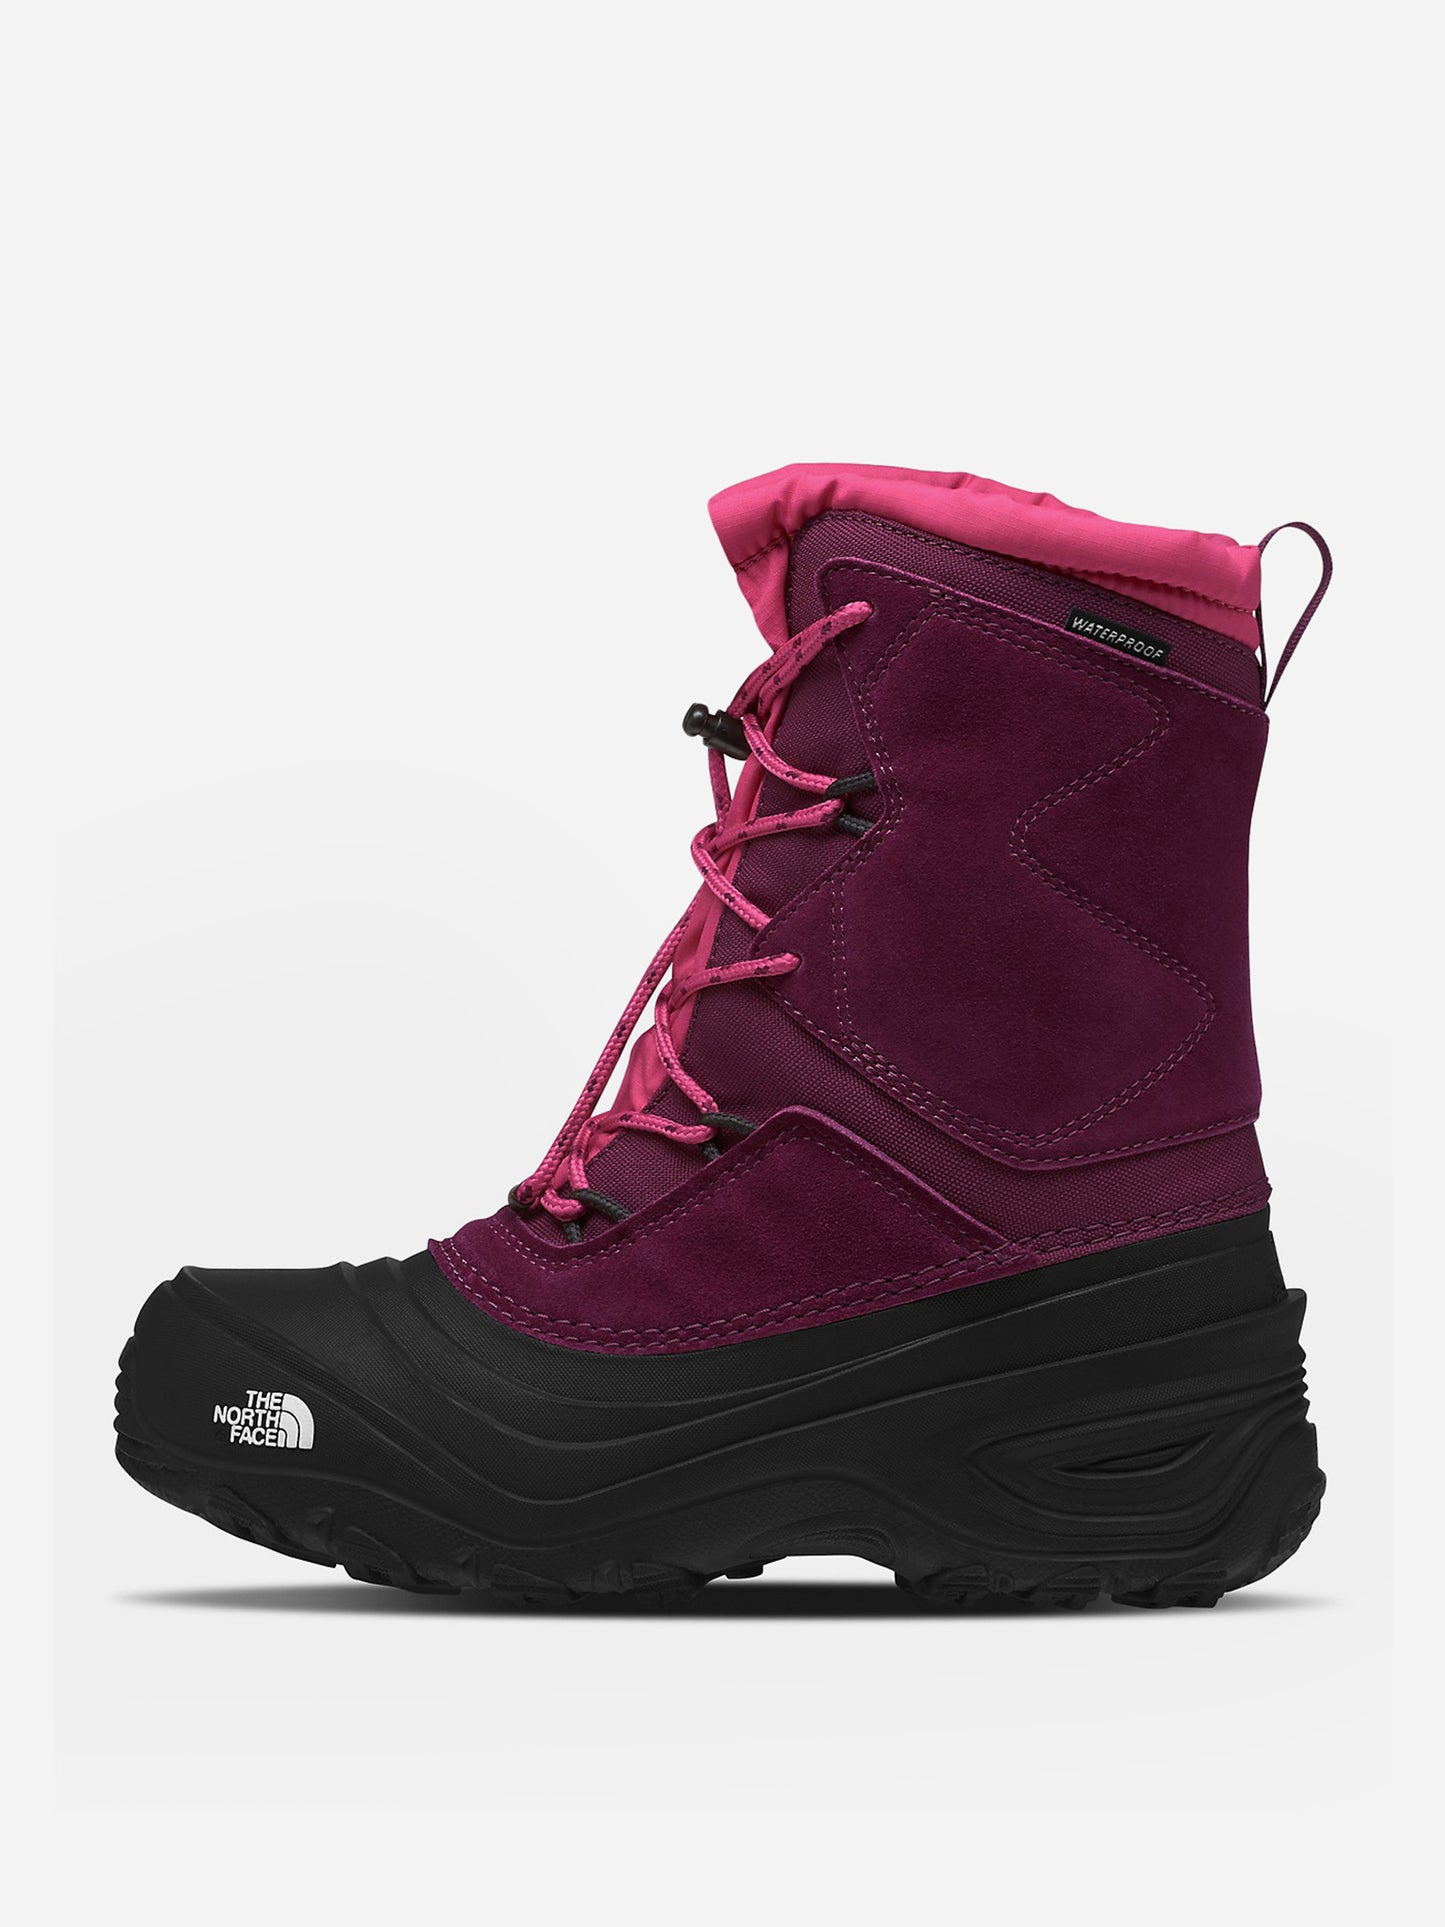 The North Face Kids’ Alpenglow V Waterproof Boot